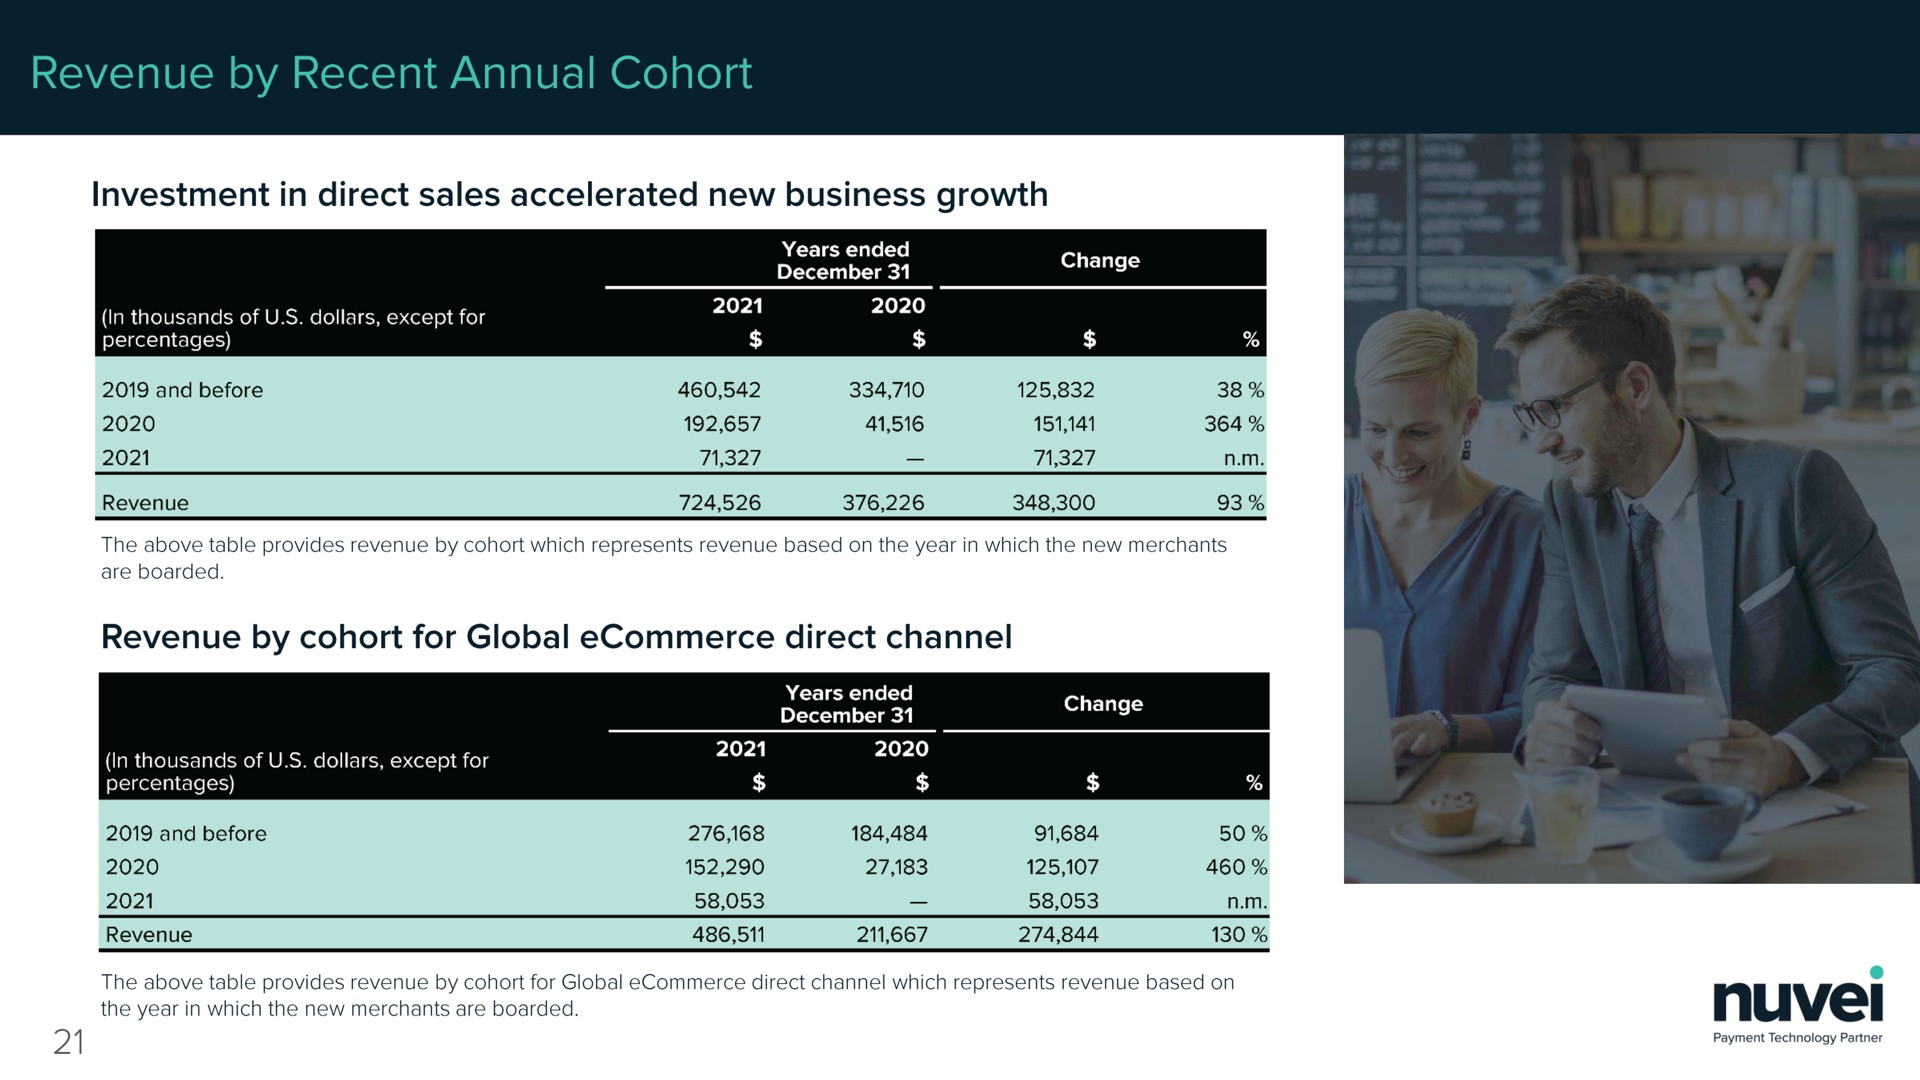 revenue by recent annual cohort investment in direct sales accelerated new business growth revenue by cohort for global direct channel | Nuvei